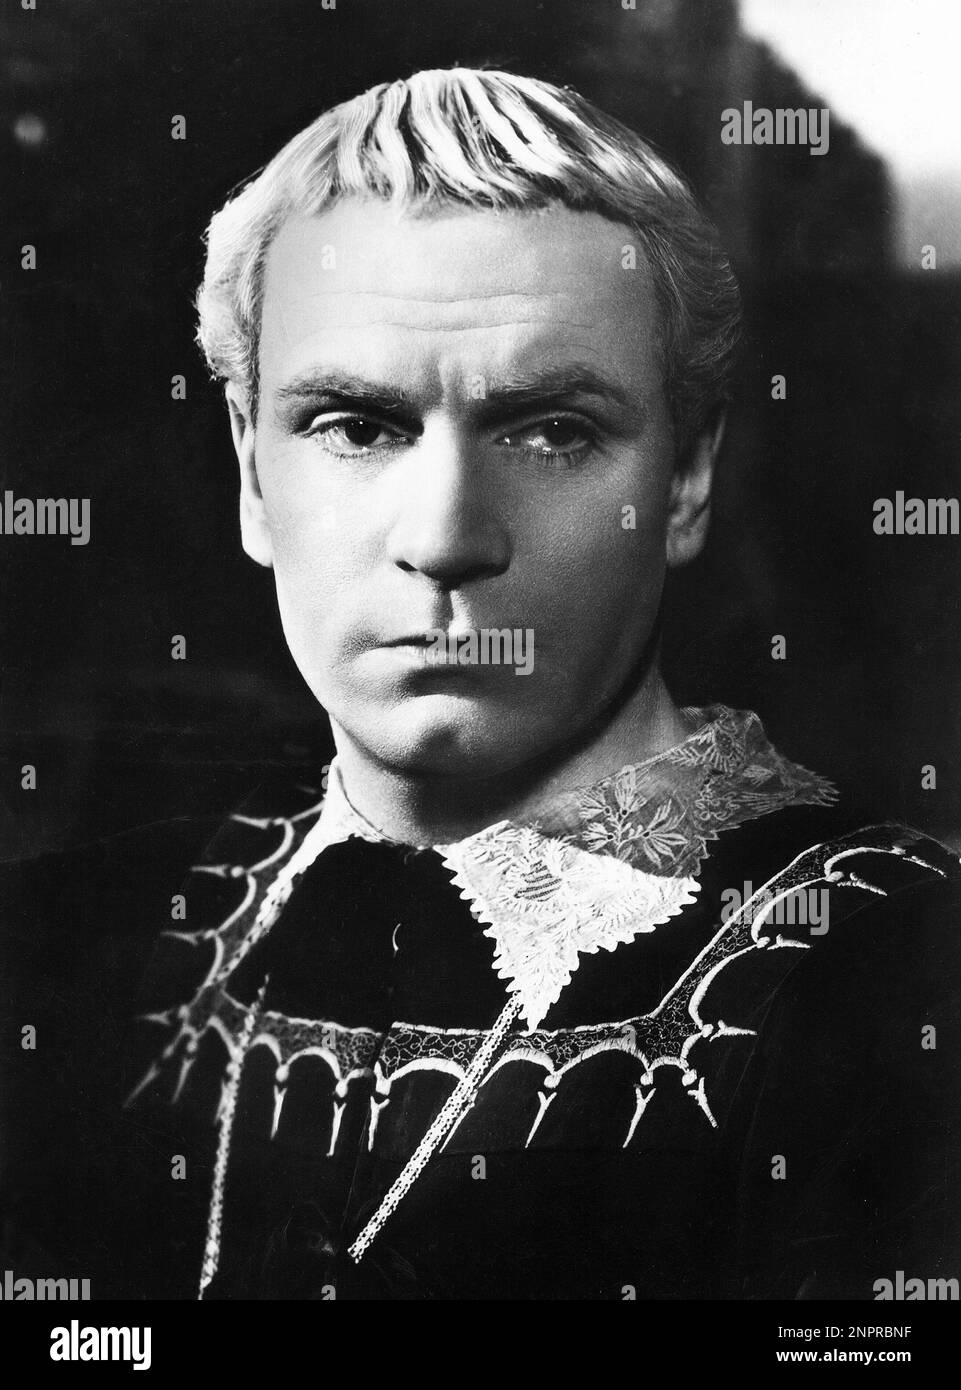 1948 : The british actor Sir LAURENCE OLIVIER ( 1907 - 1989 ) in HAMLET  ( Amleto )  by Laurence Olivier , from the play by William Shakespeare . Pubblicity still . - CINEMA - MOVIE - FILM - capelli biondi - blond hair - biondo - blond - colletto di pizzo - lace collar - tragedia - tragedy  ----  Archivio GBB Stock Photo